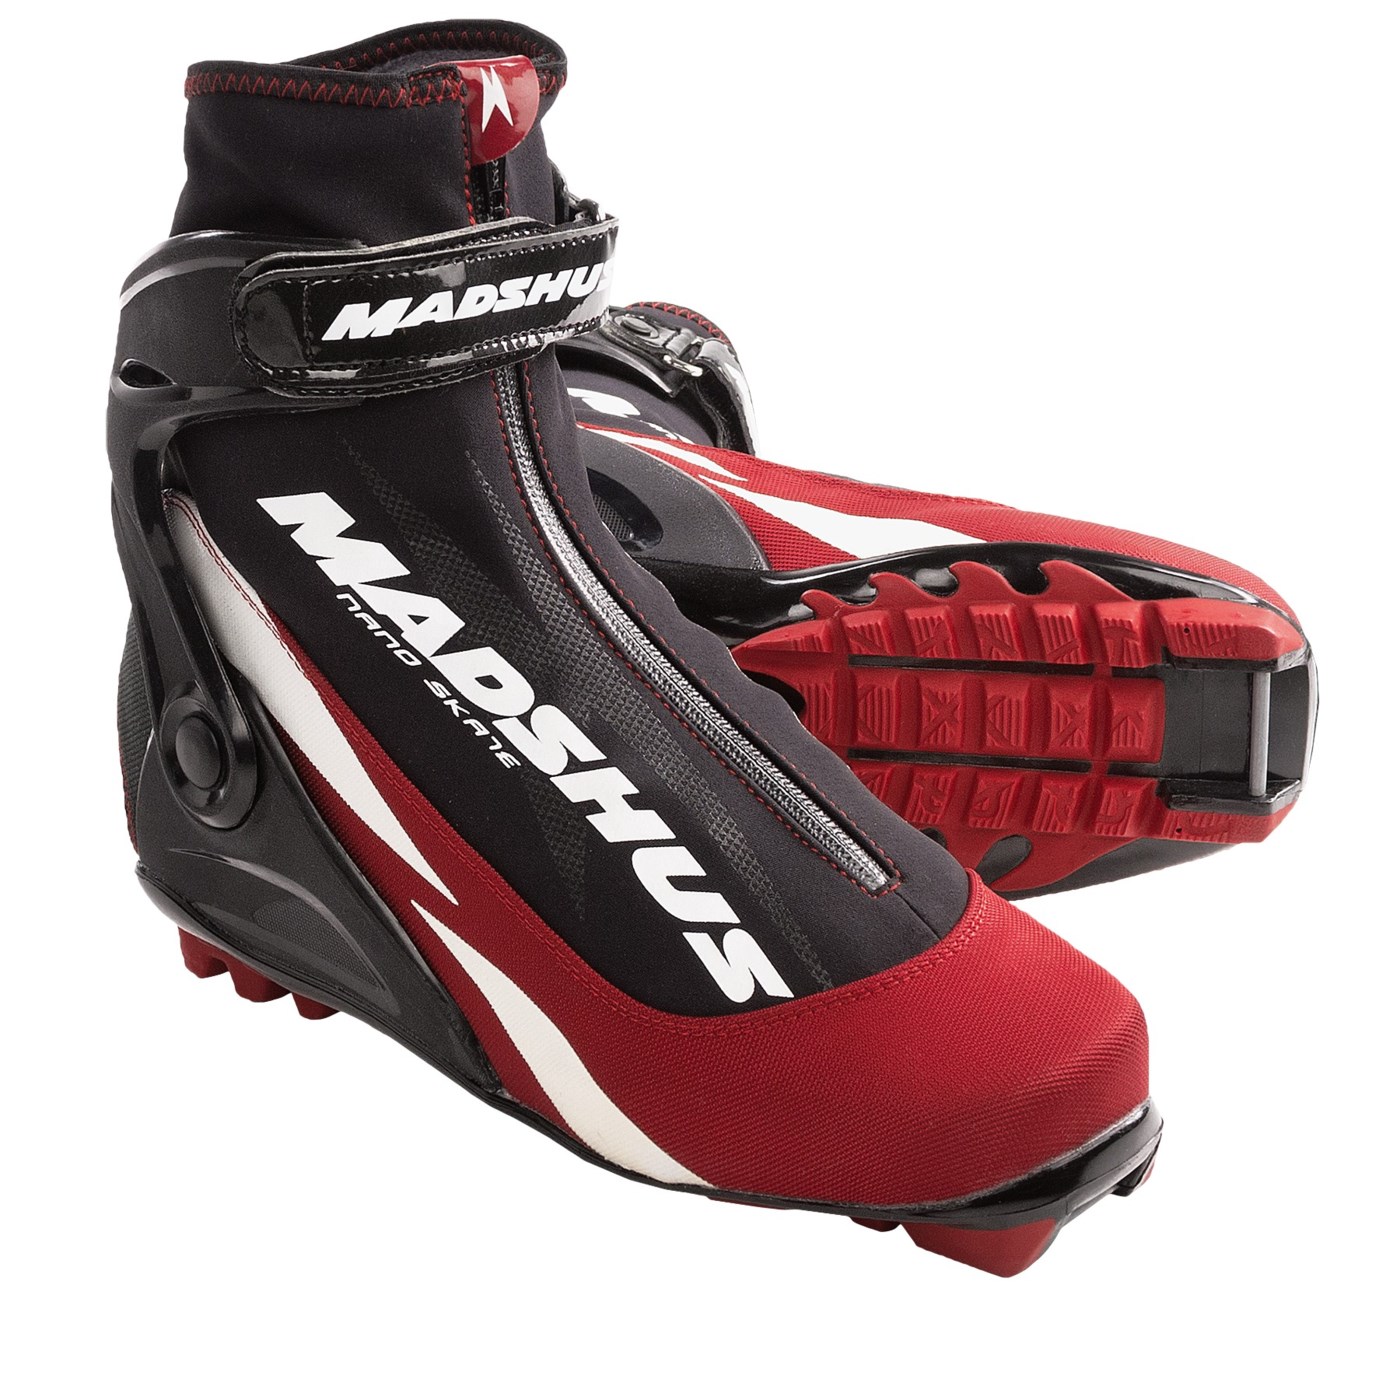 Ski boots trample images